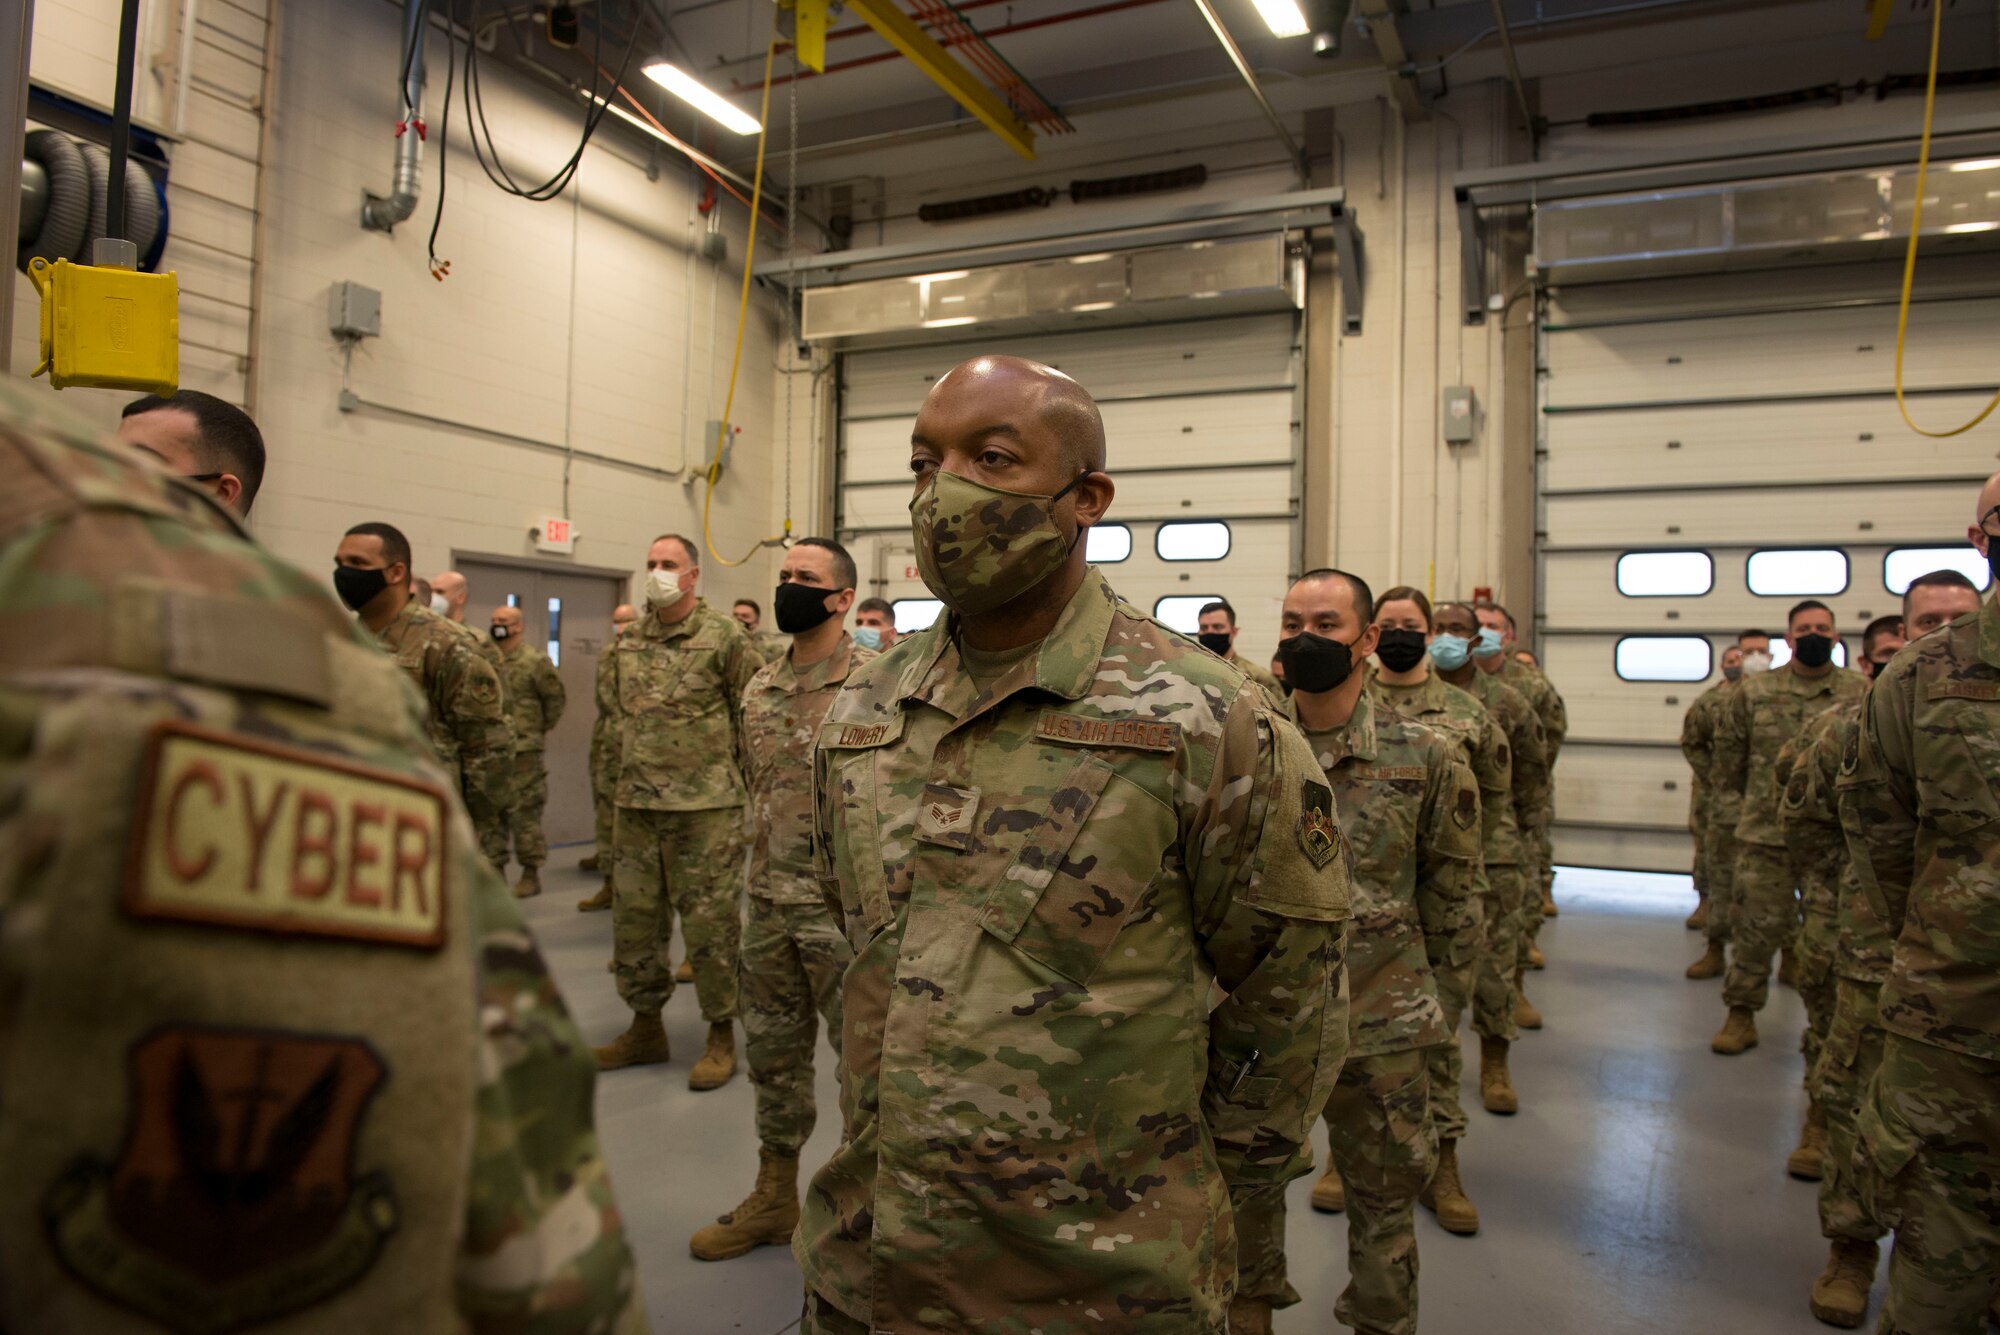 Members of the Connecticut Air National Guard, 103rd Air Control Squadron stand in formation during a briefing by Maj. Gen. Fran Evon, The Adjutant General of the Connecticut National Guard, April 15, 2021 in Orange, Connecticut. Members of 103rd ACS deployed to multiple locations in Southwest Asia and the United States in support of Operation Inherent Resolve and Mission Resolute Support. (U.S. Air National Guard photo by Master Sgt. Tamara R. Dabney)